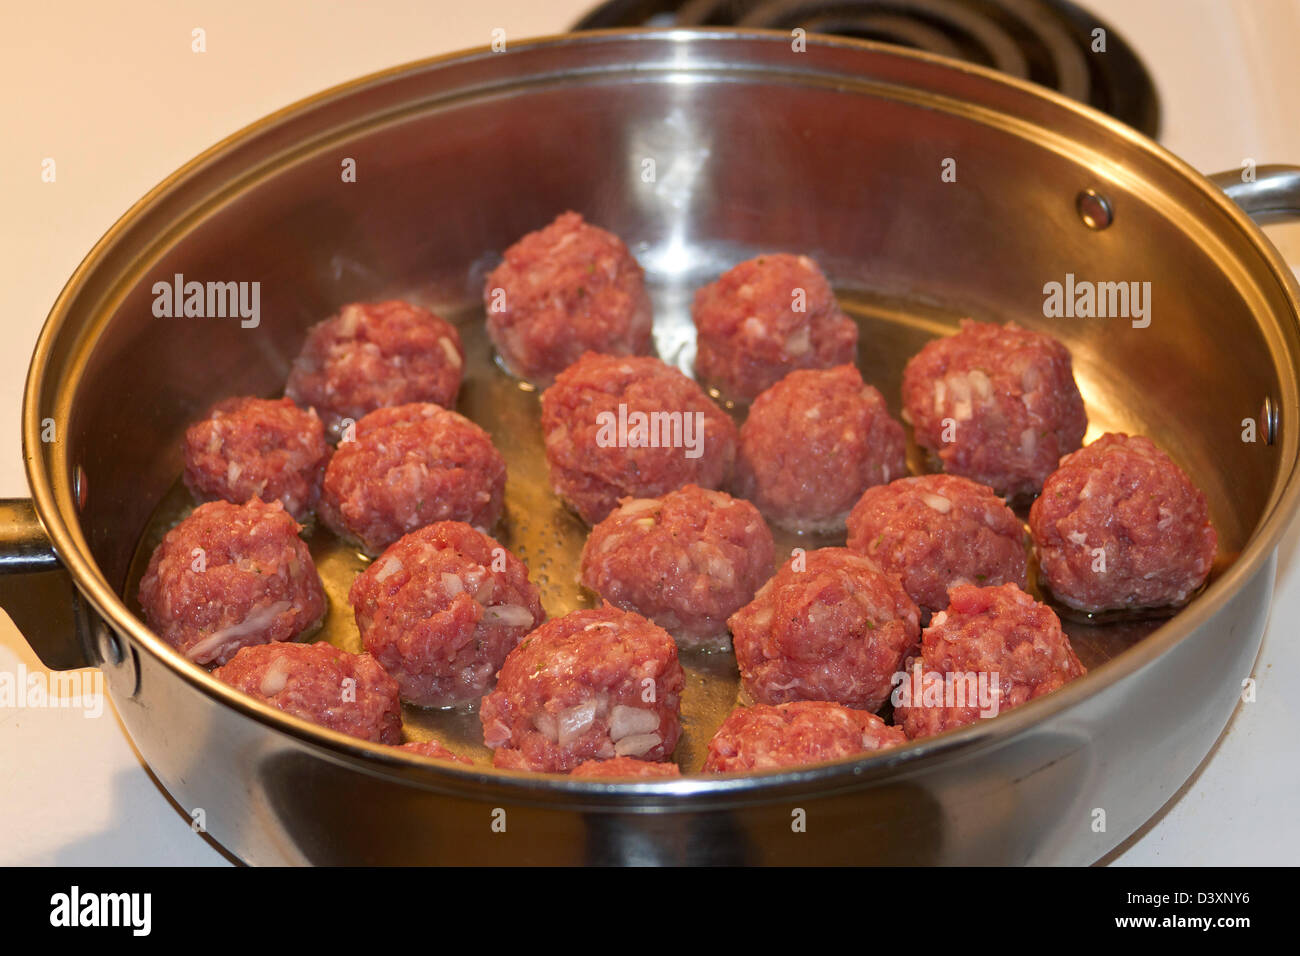 A frying pan with meatballs being fried in oil Stock Photo